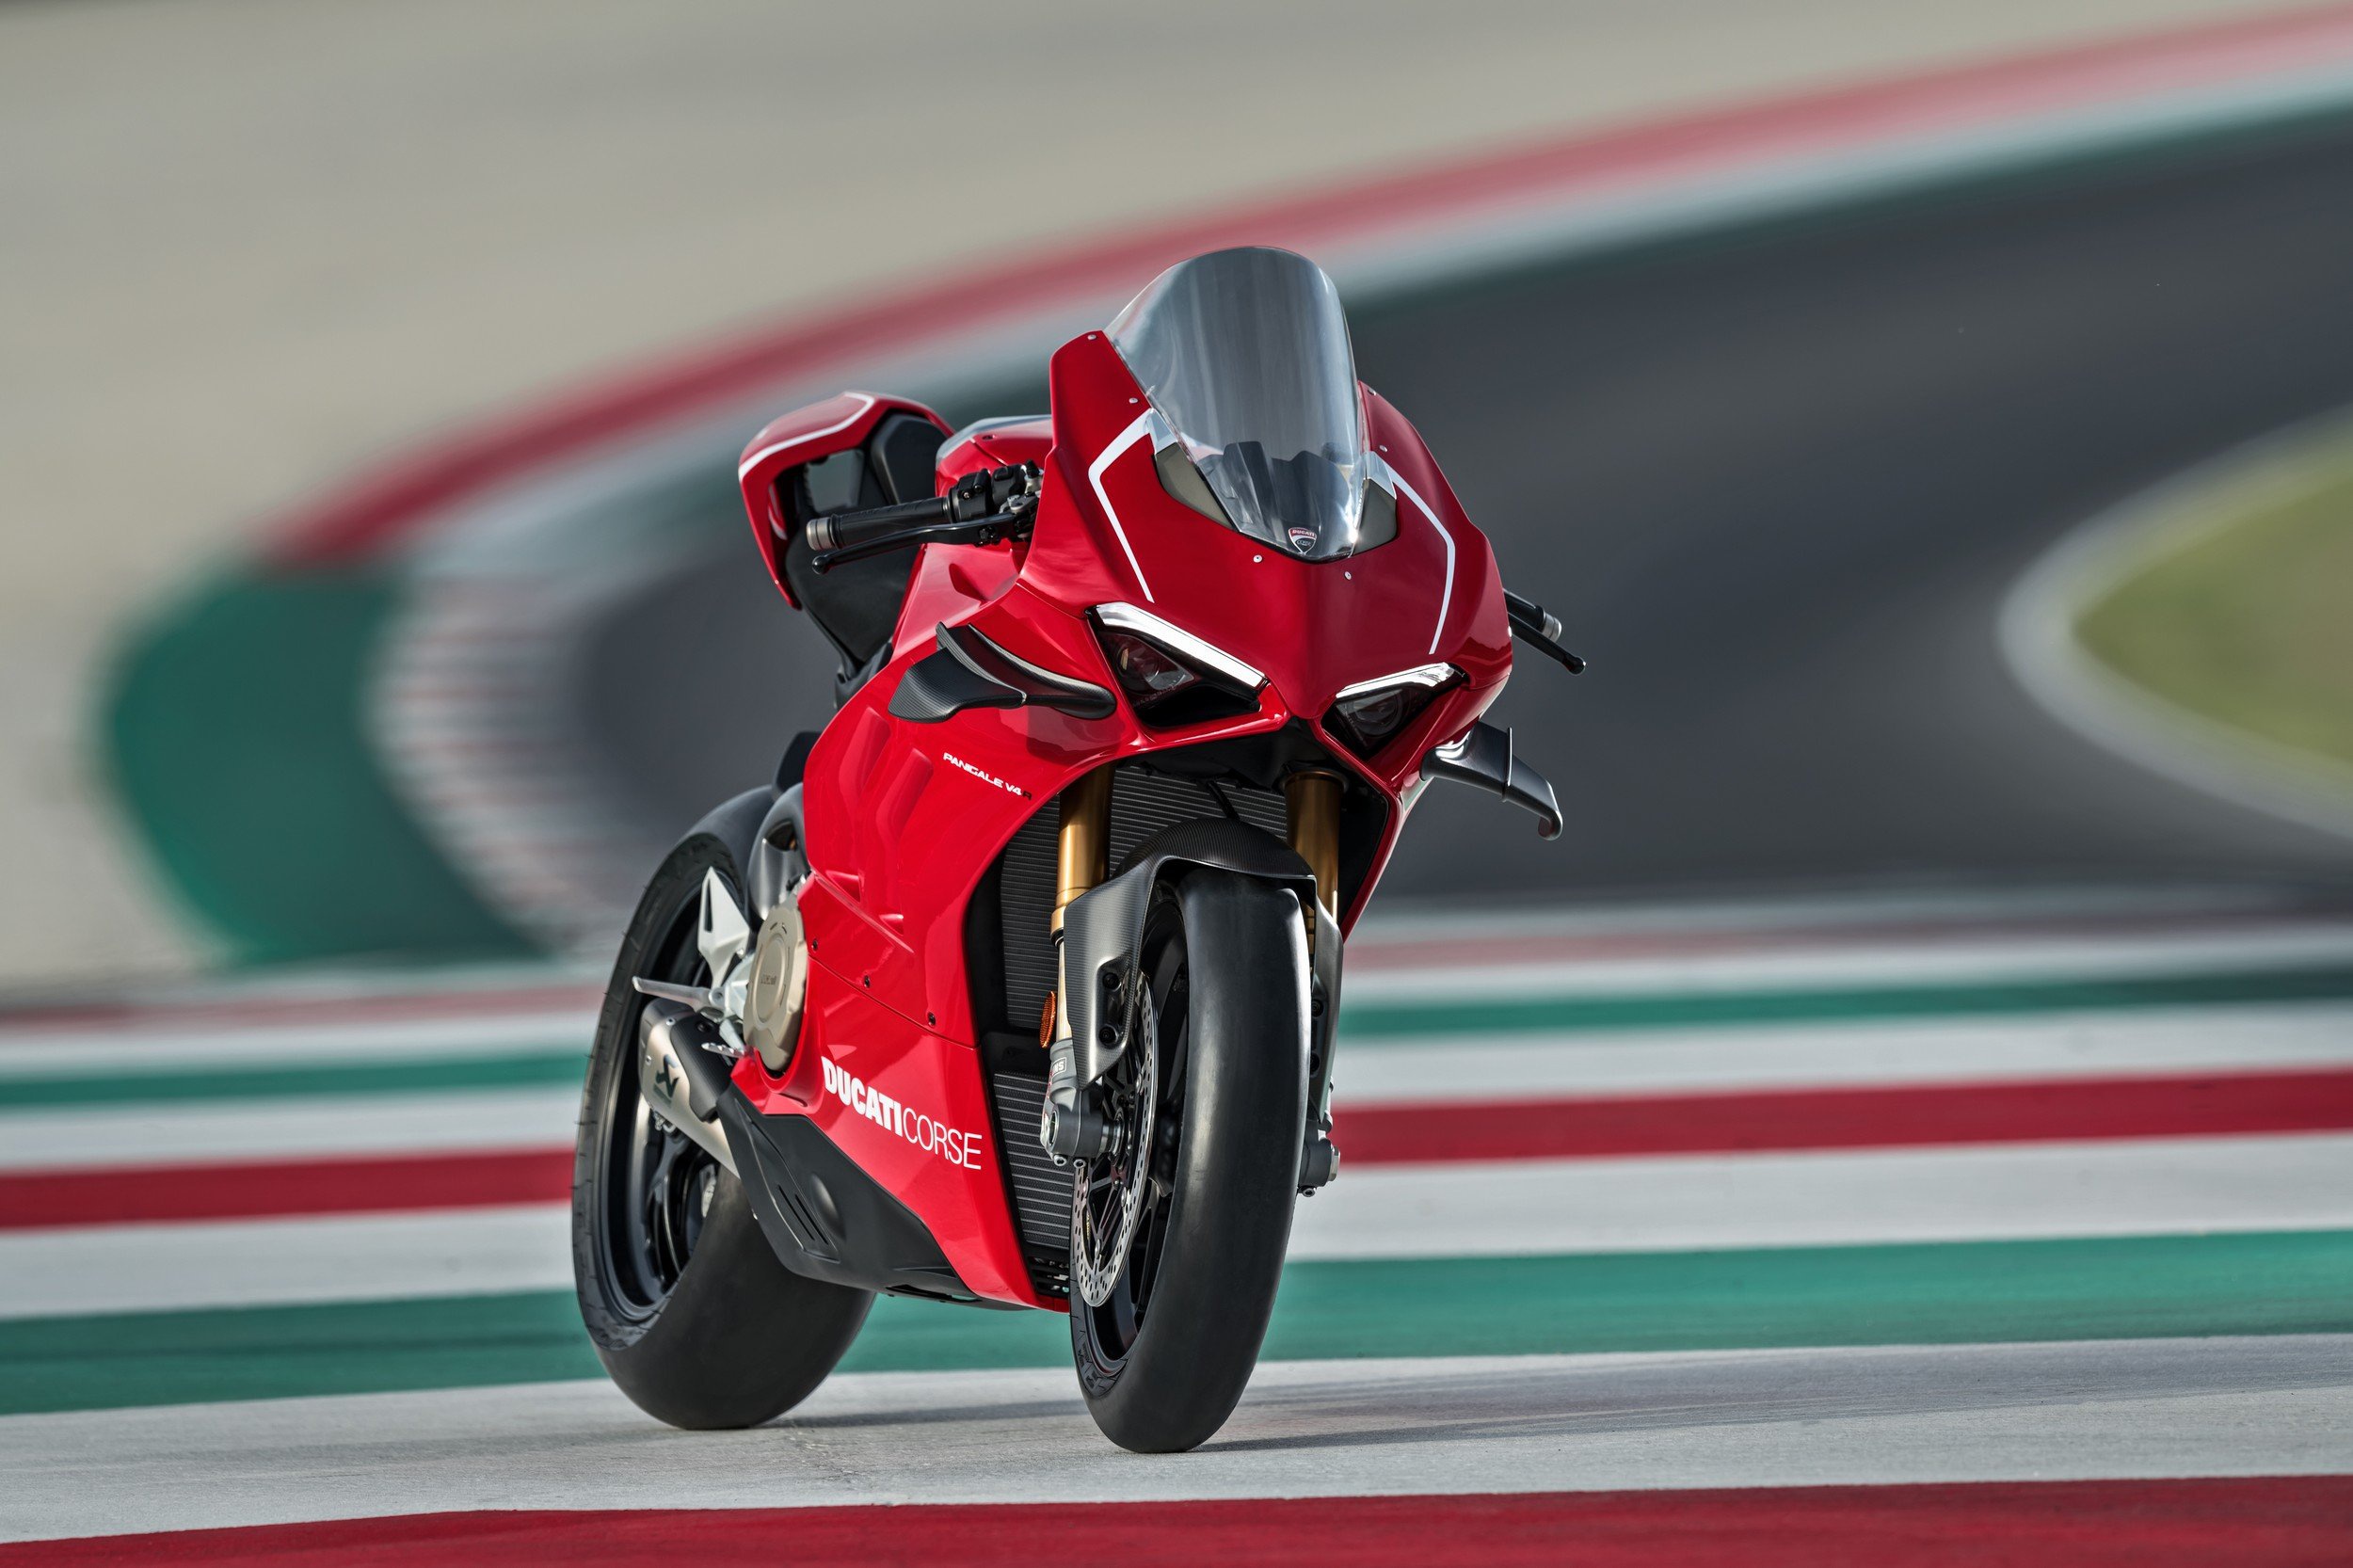 30k Ducati Panigale Pictures  Download Free Images on Unsplash